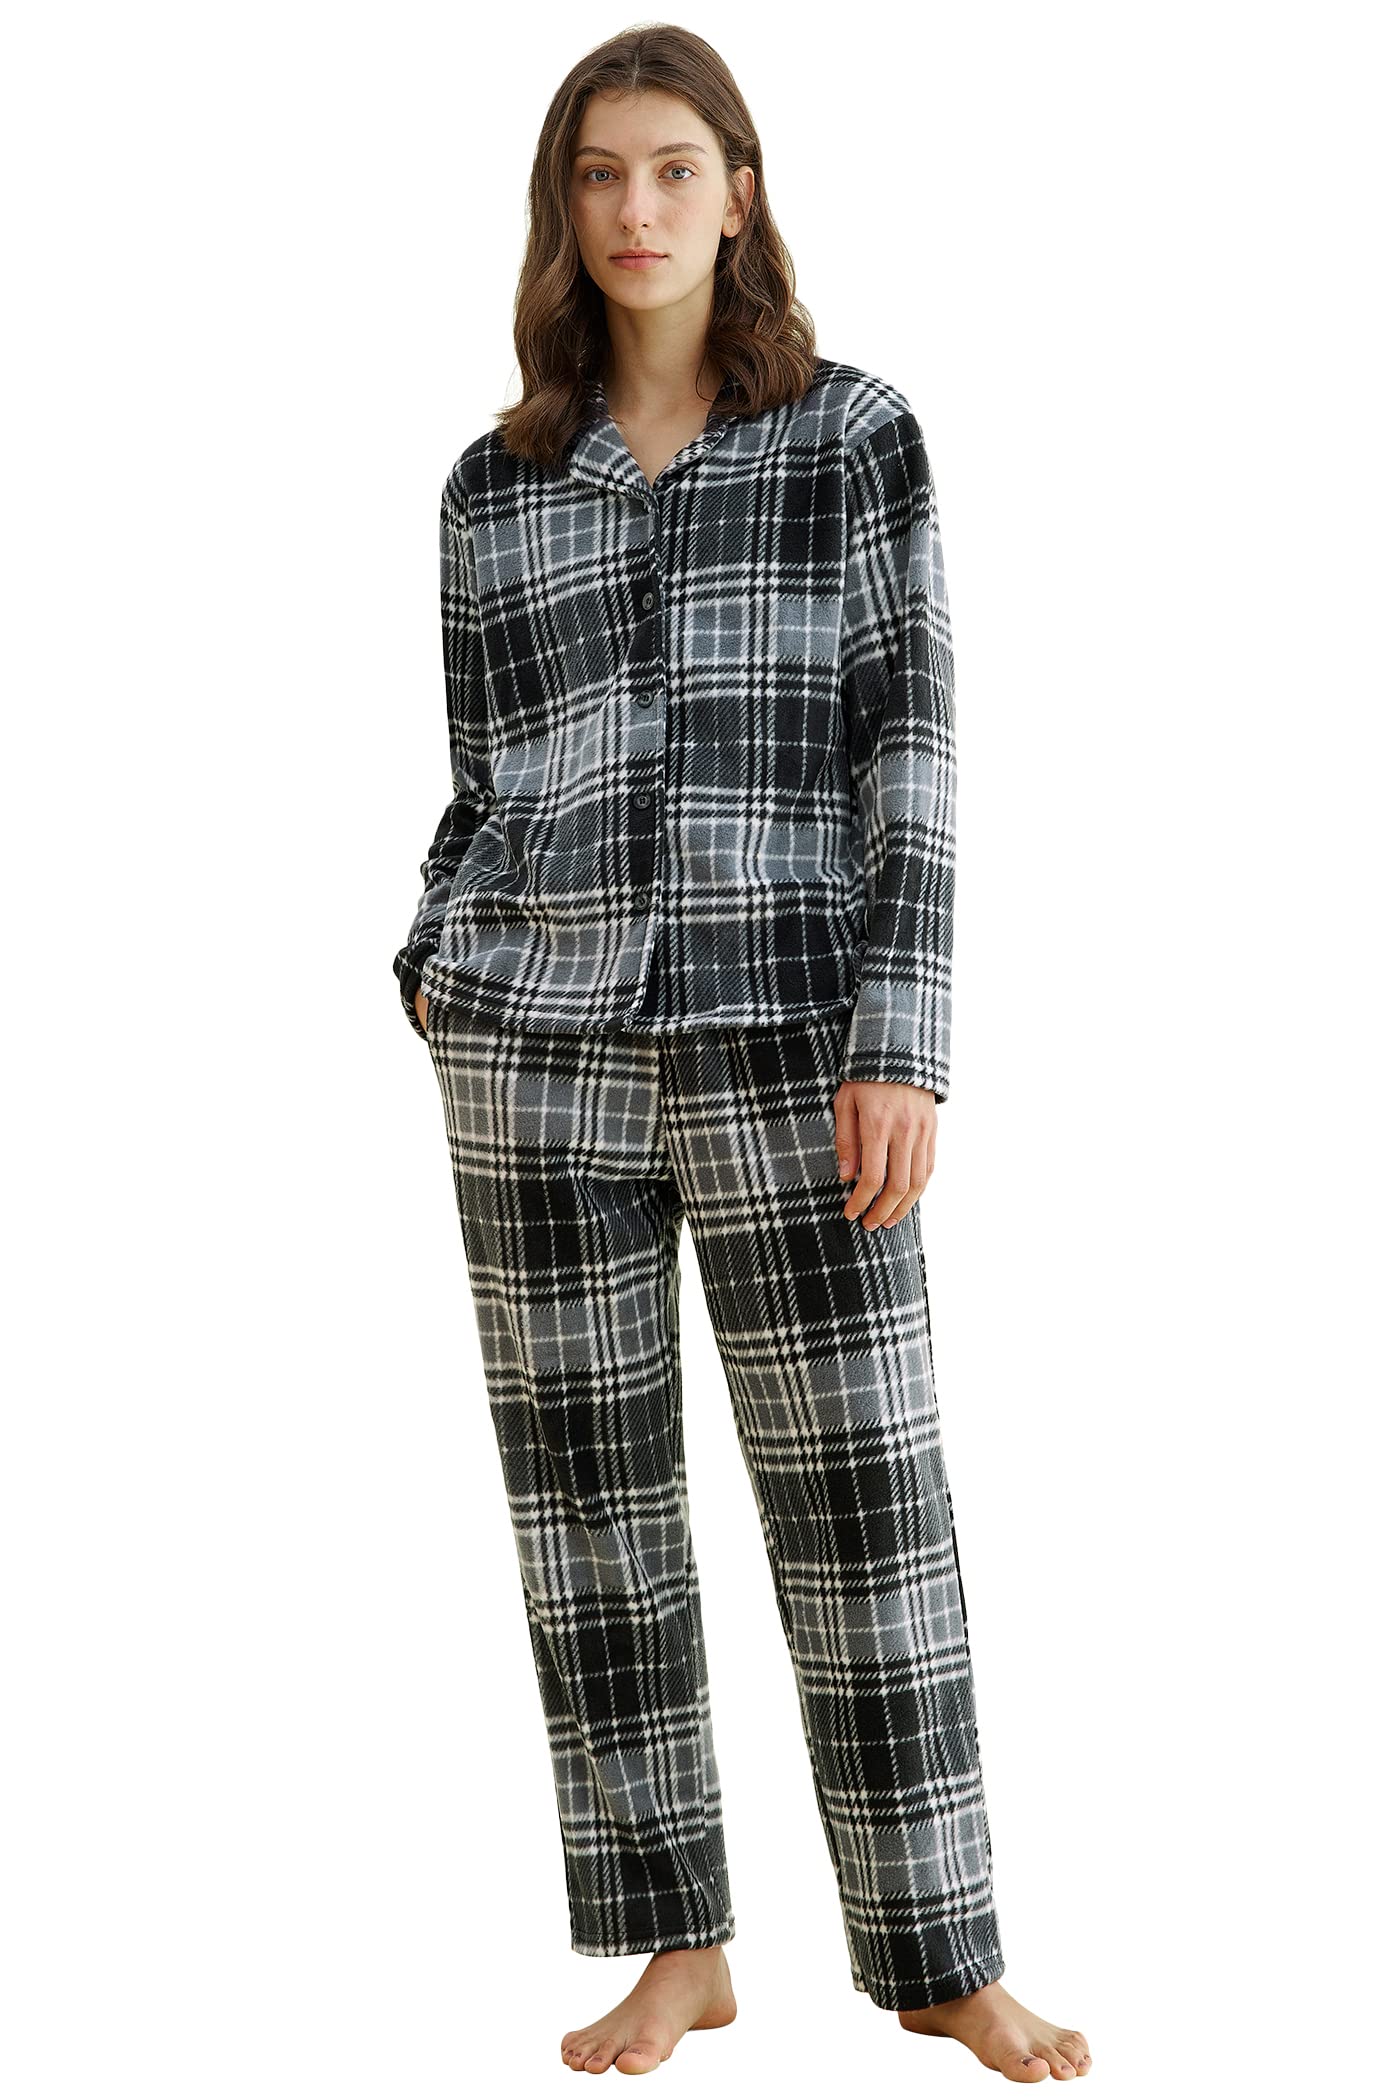 Women's 2 Piece Fleece Pajamas Set Button Down Rollneck Top with Pullover  Pants Sleepwear Lightweight Pjs Ladies Long Sleeve Fluffy Fuzzy Polka Dots  Loungewear for tees dress K87-A at  Women's Clothing